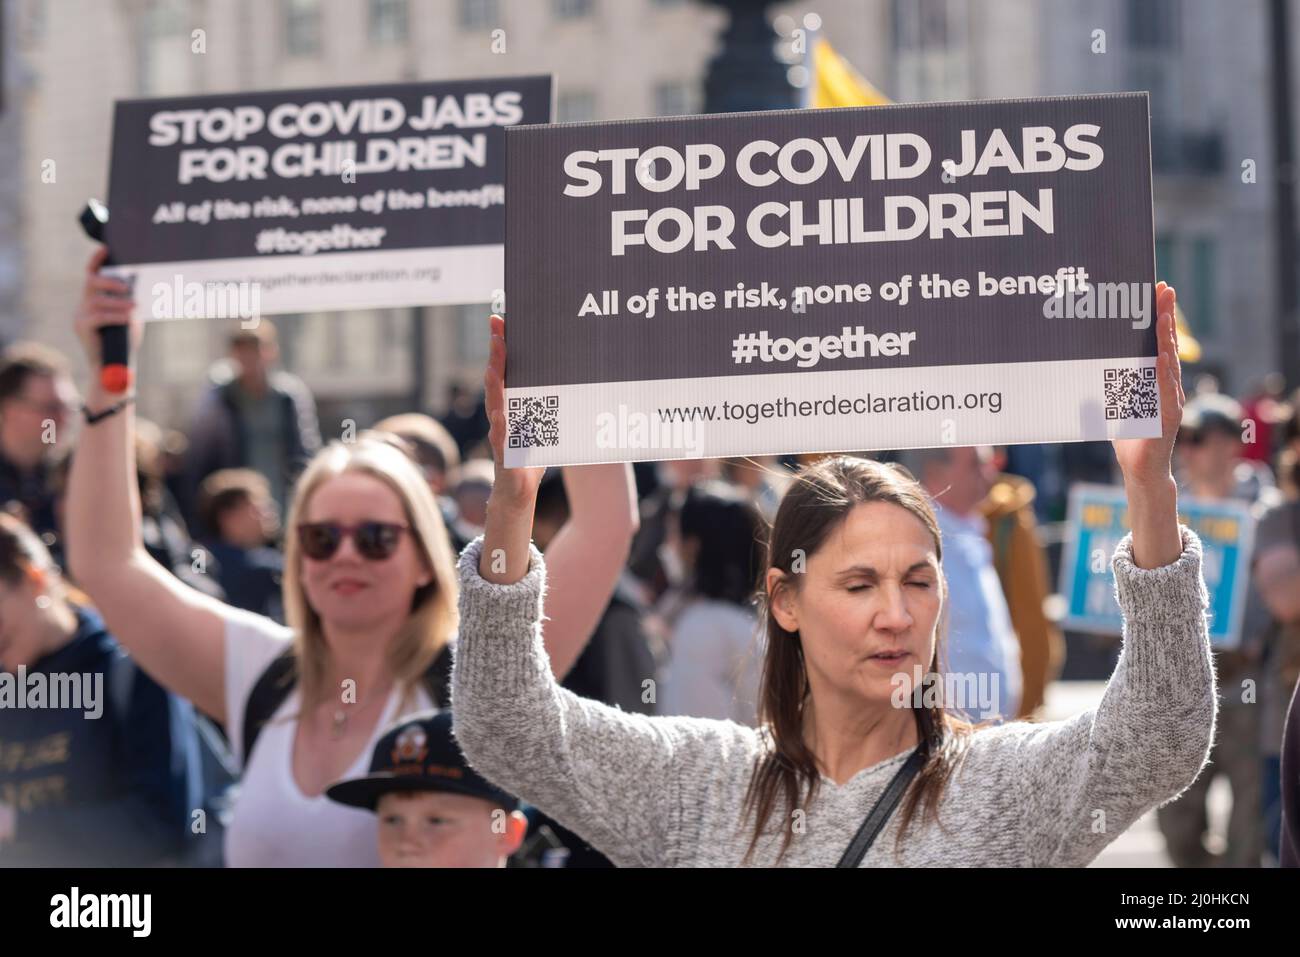 Westminster, London, UK. 19th Mar, 2022.A protest is taking place against vaccinating children for Covid 19, joined by anti-vaxxers. Stop covid jabs for children placard. All of the risk, none of the benefit. #together Stock Photo